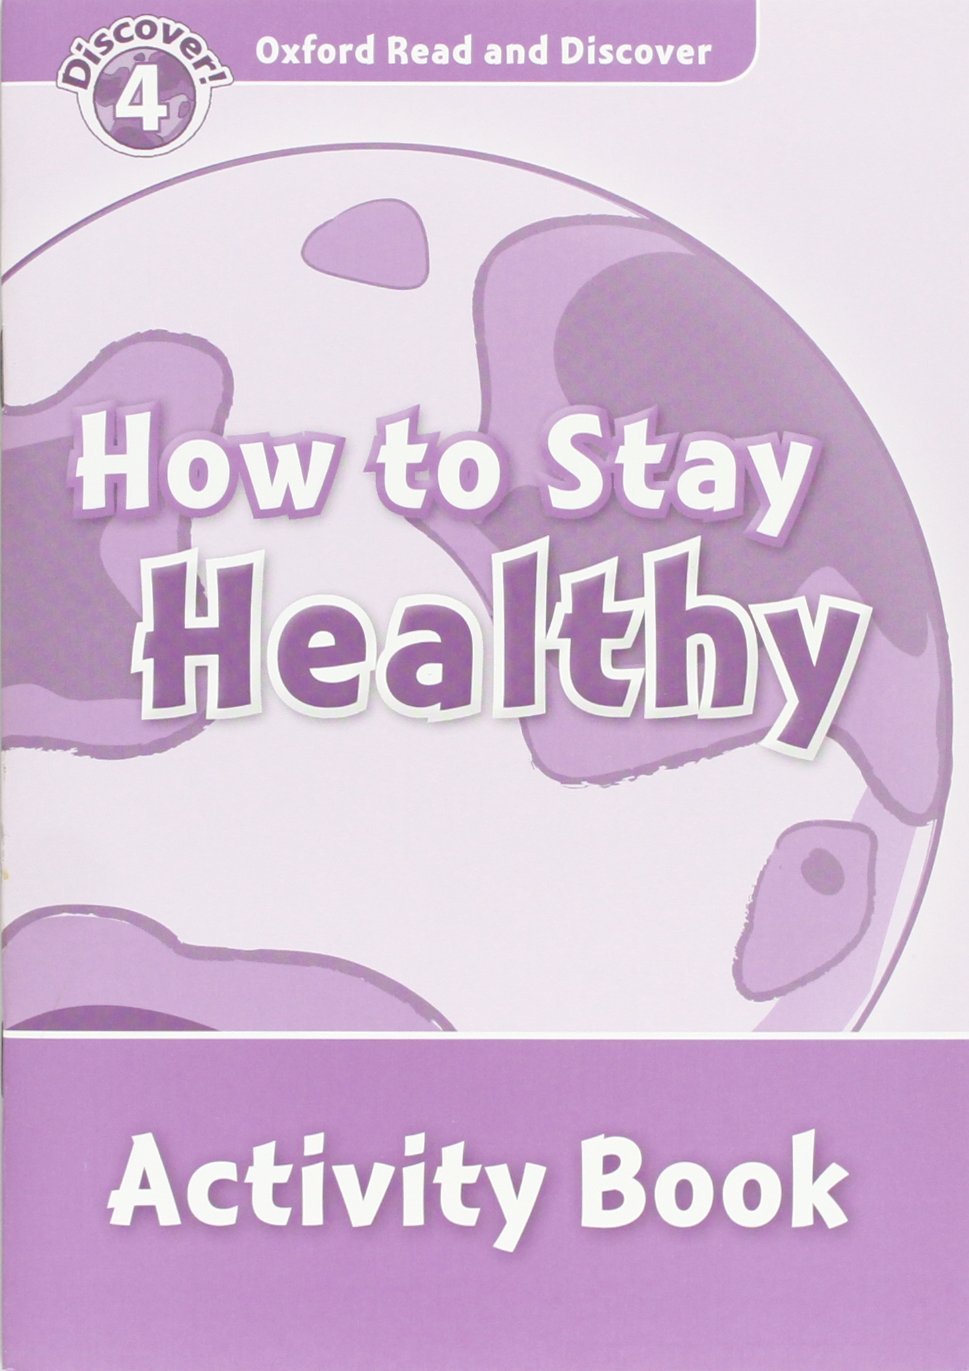 HOW TO STAY HEALTHY (OXFORD READ AND DISCOVER, LEVEL 4) Activity Book